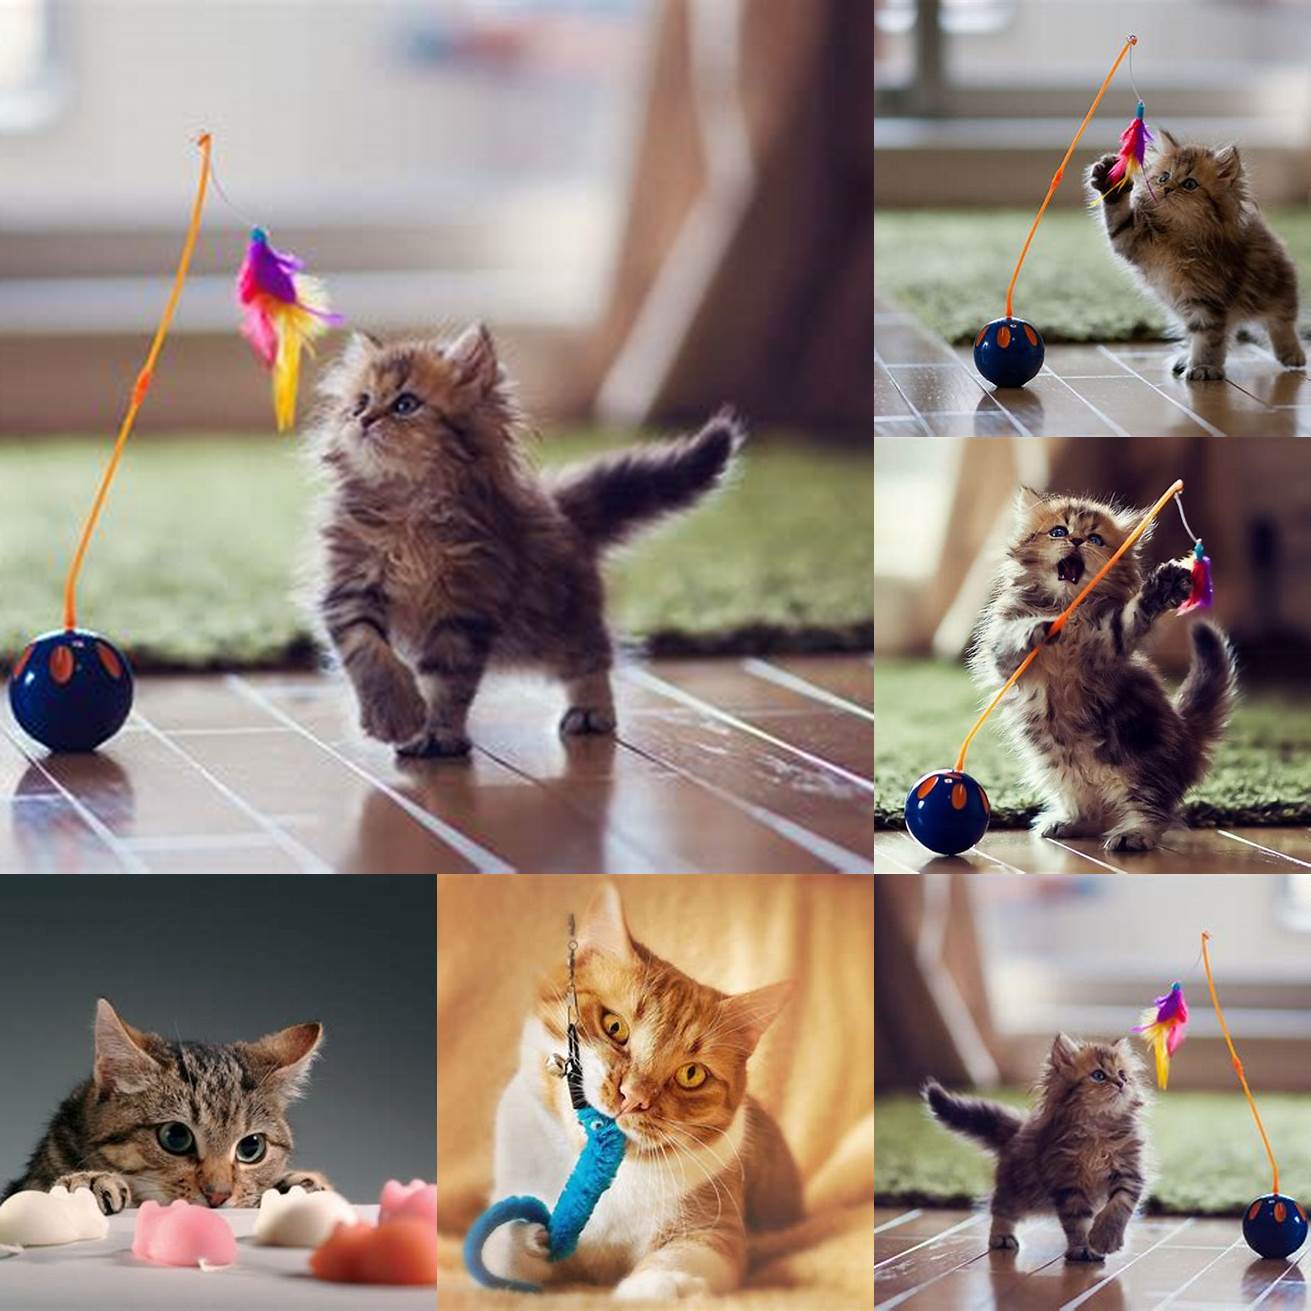 Cats playing with toys